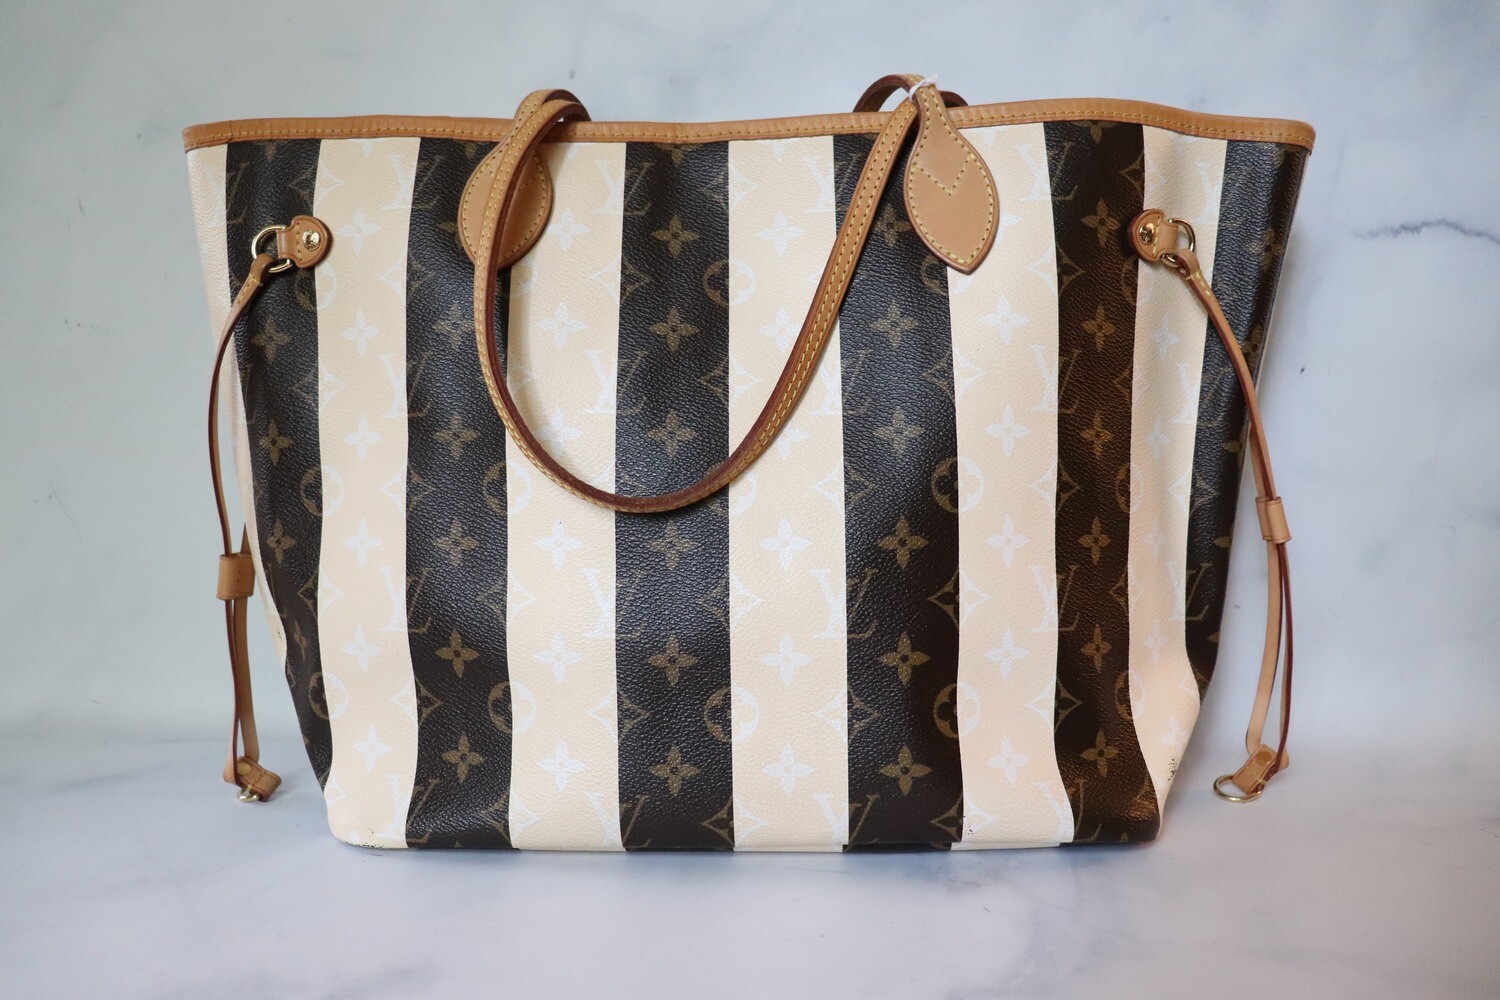 Louis Vuitton Neverfull Limited Edition Stripes Tote bag in brown